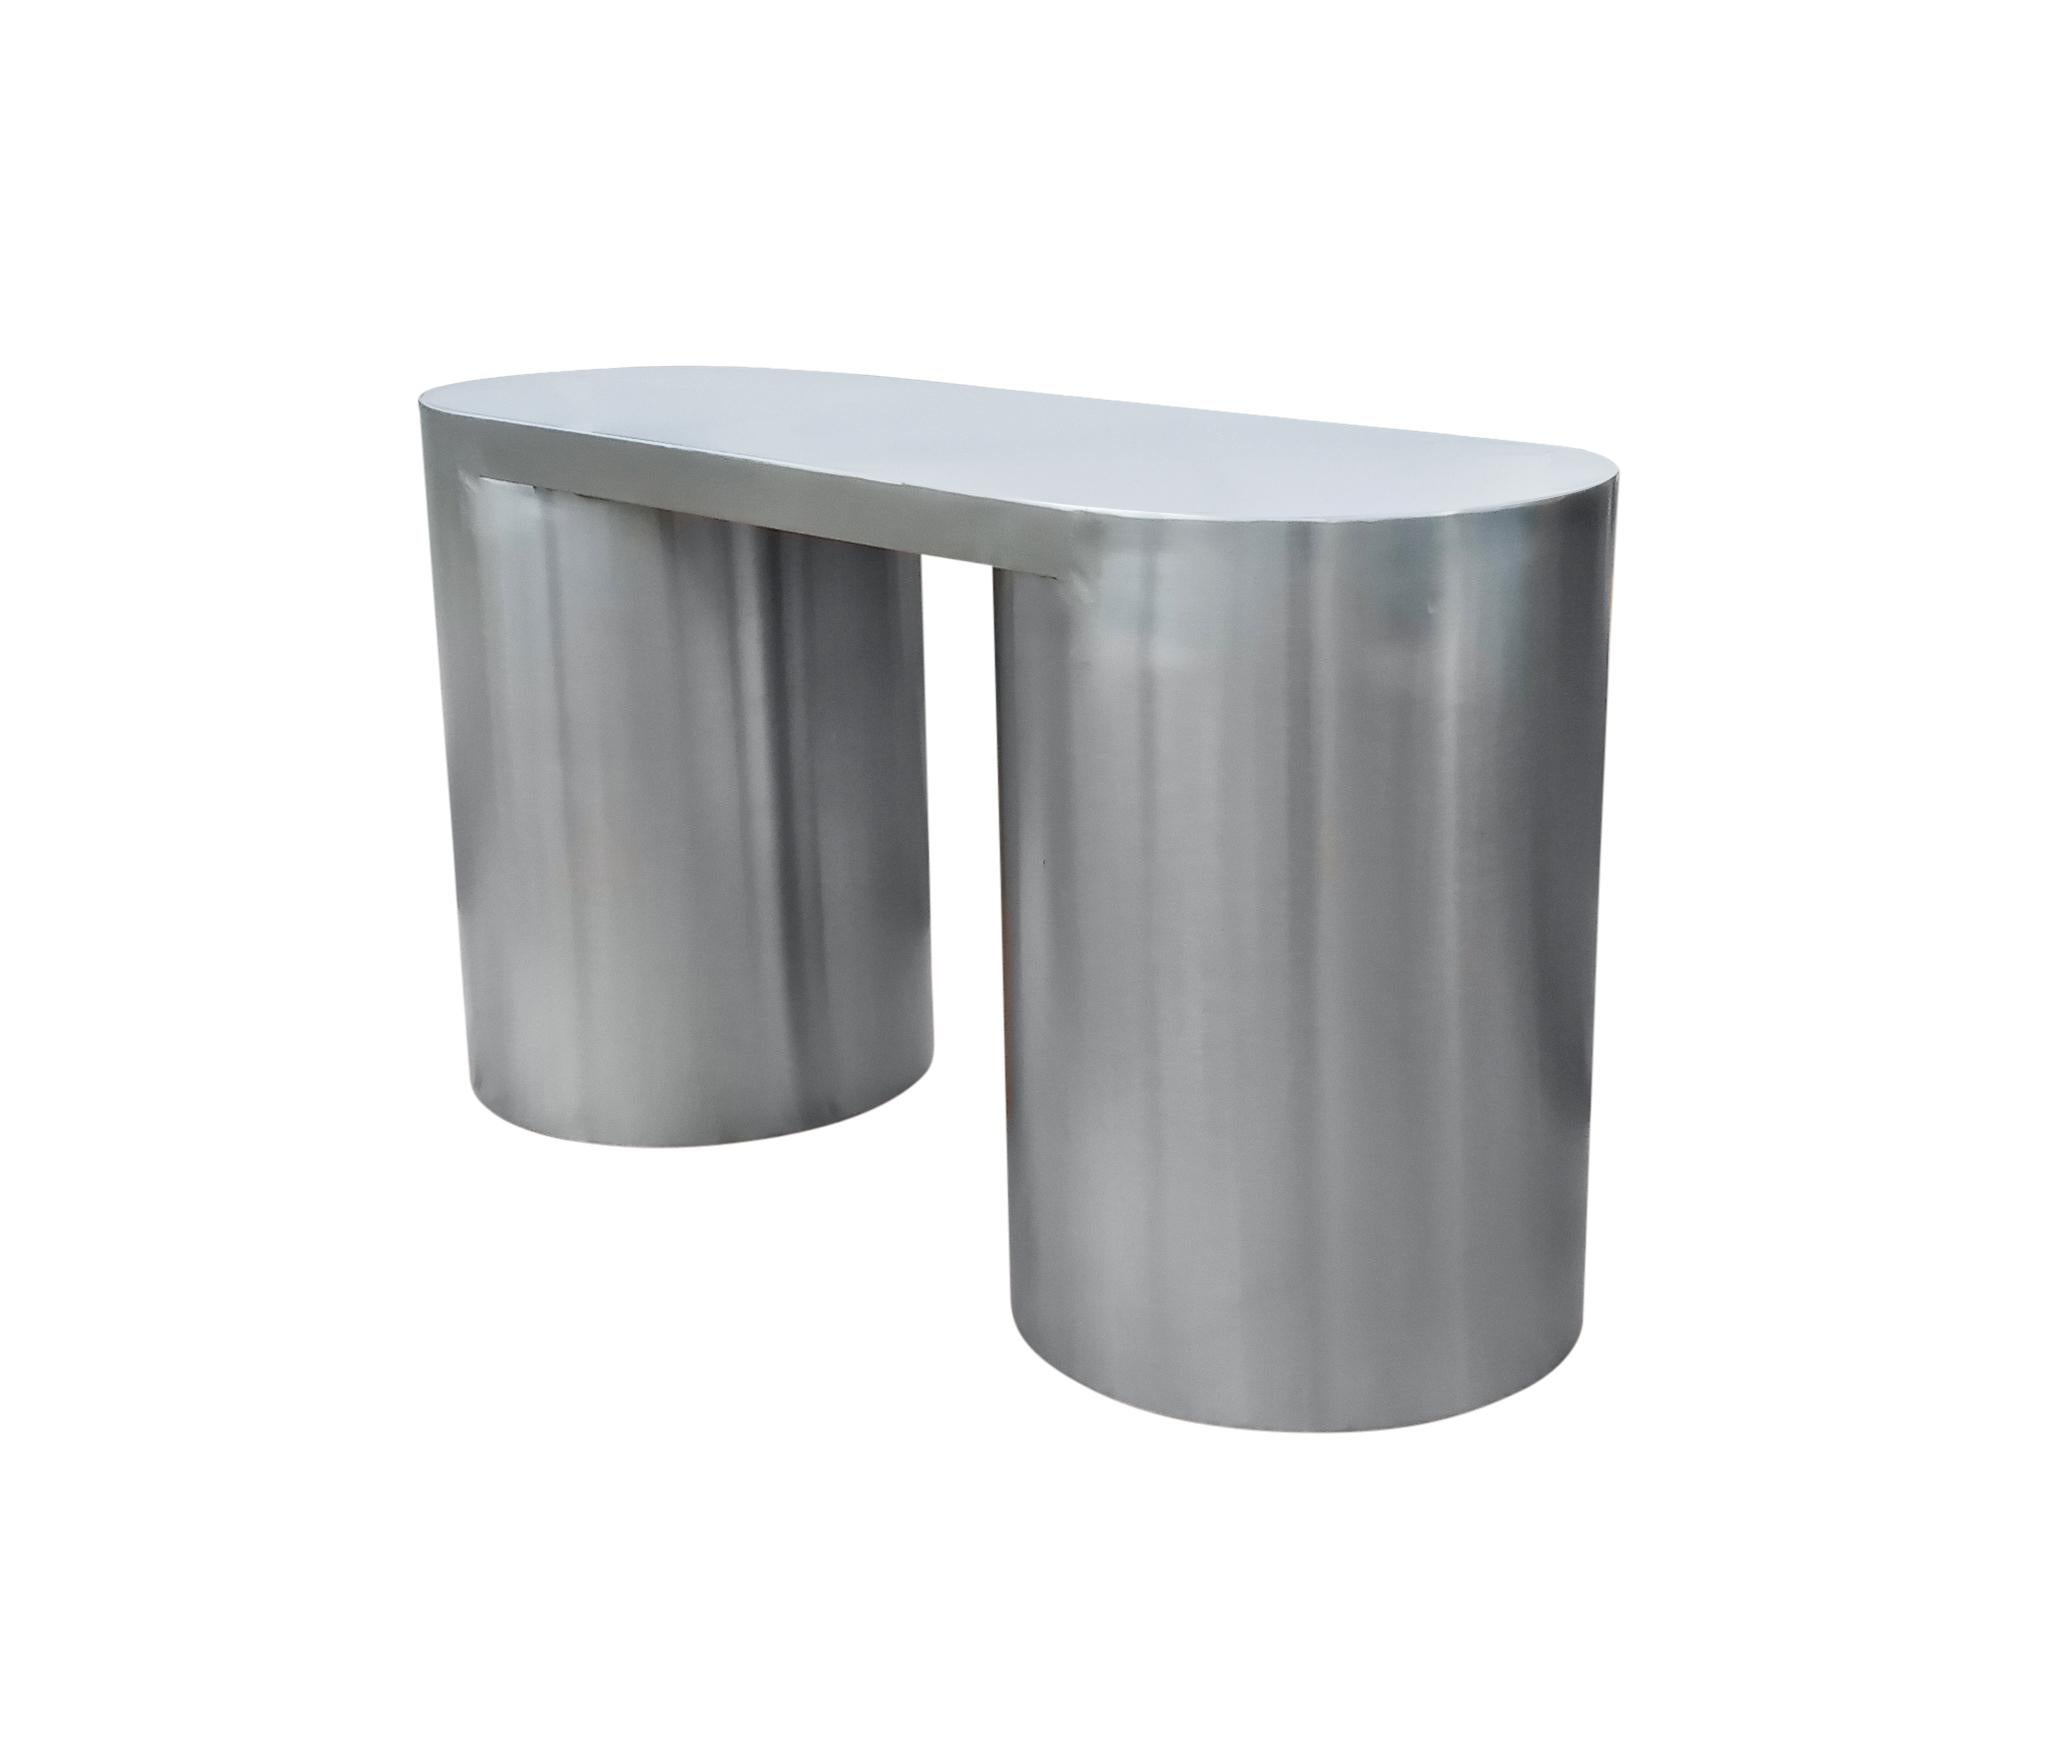 Italian Post-Modern & Vintage, Stainless Steel Console Table Desk